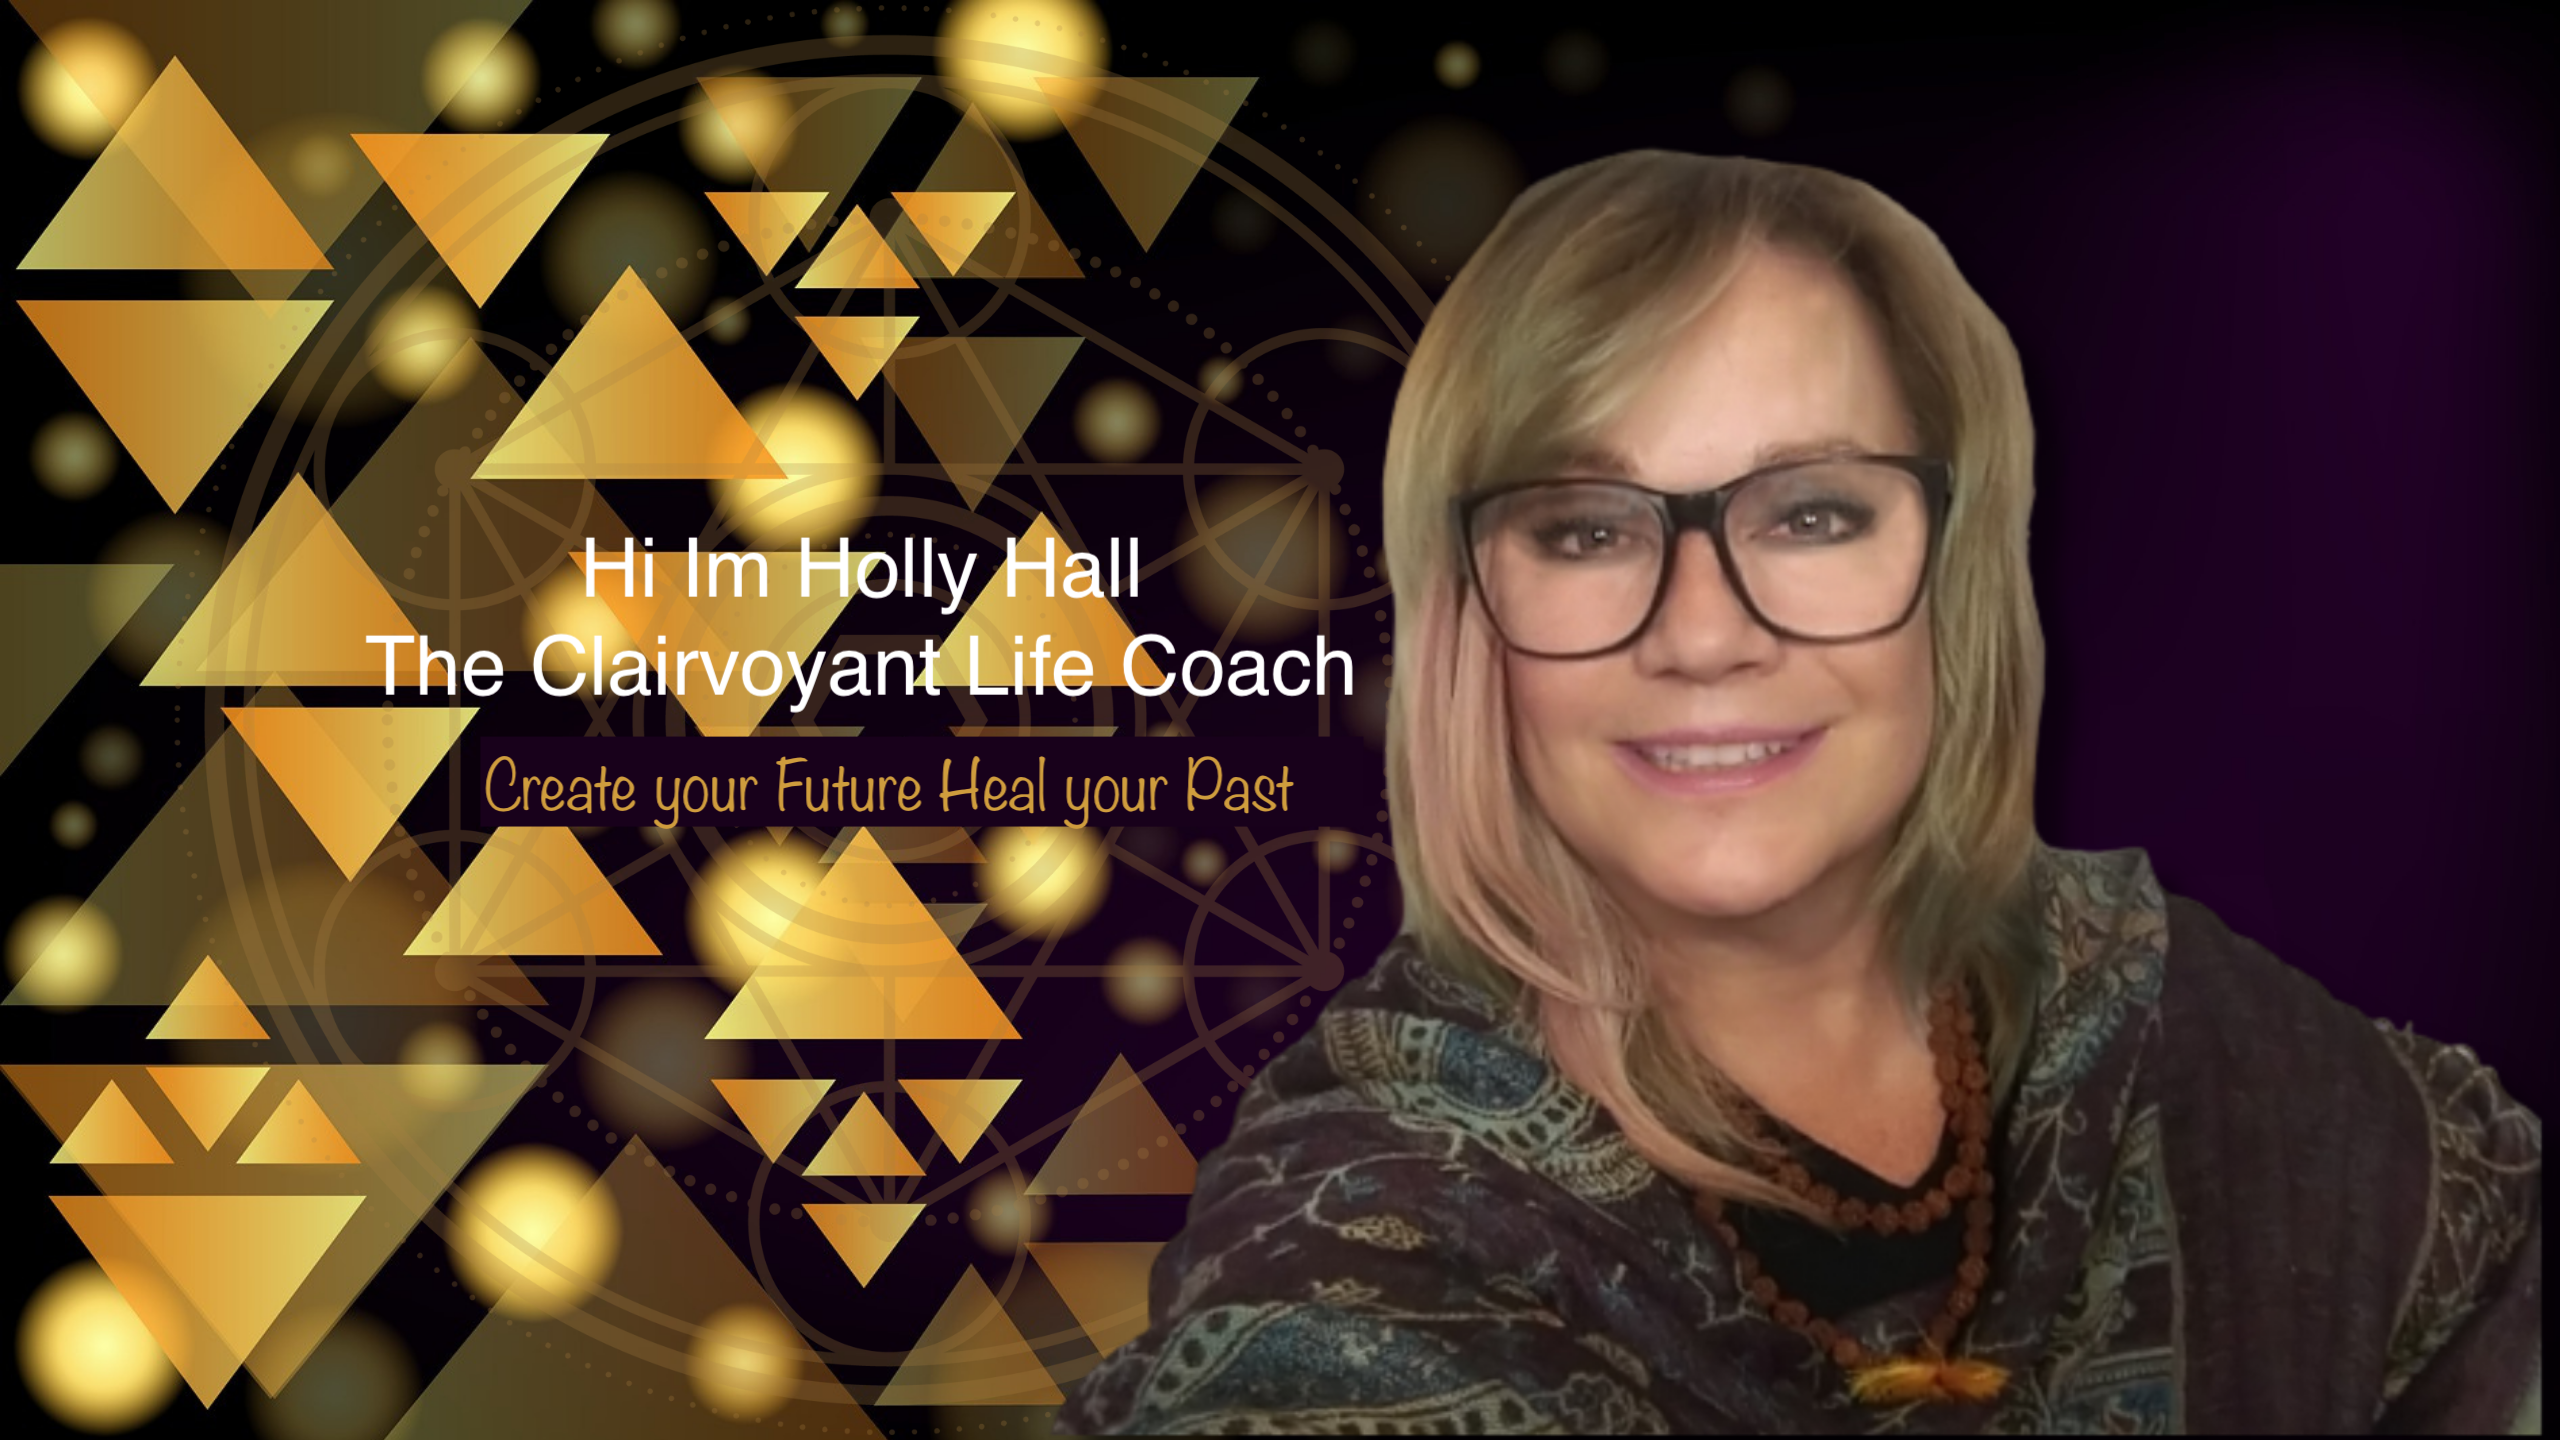 It's time to Ask Holly Hall